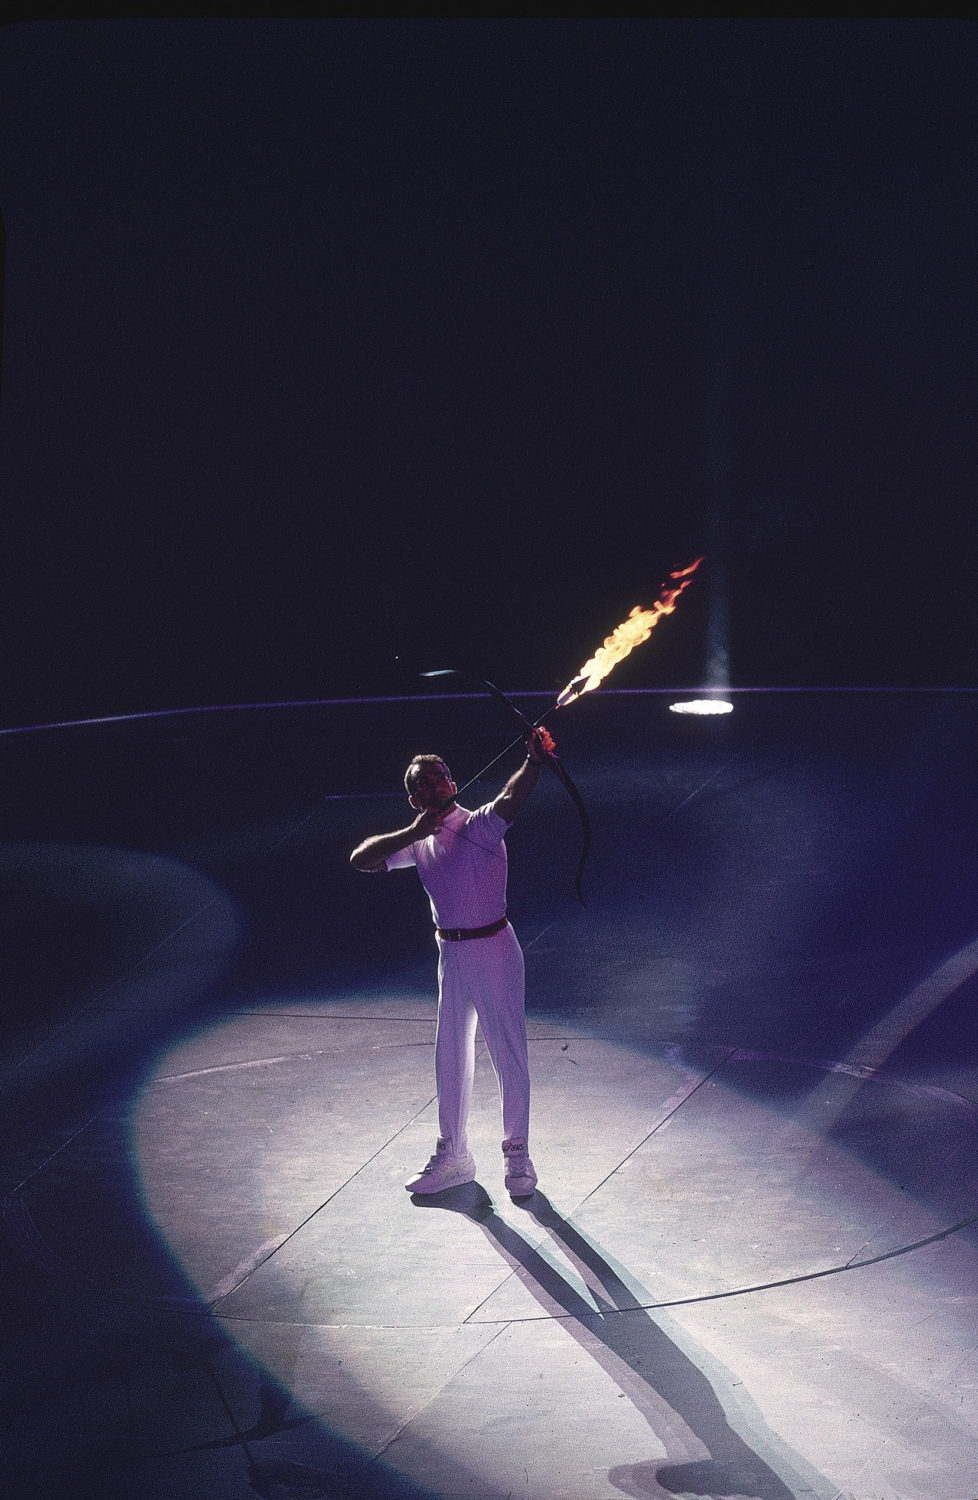 SPAIN - JULY 25: Opening Ceremony: 1992 Summer Olympics, Paralympic archer Antonio Rebollo shooting lit arrow and lighting flame at Olympic Stadium, Barcelona, Spain 7/25/1992 (Photo by Peter Read Miller/Sports Illustrated/Getty Images) (SetNumber: X43182 TK1 R5 F34)